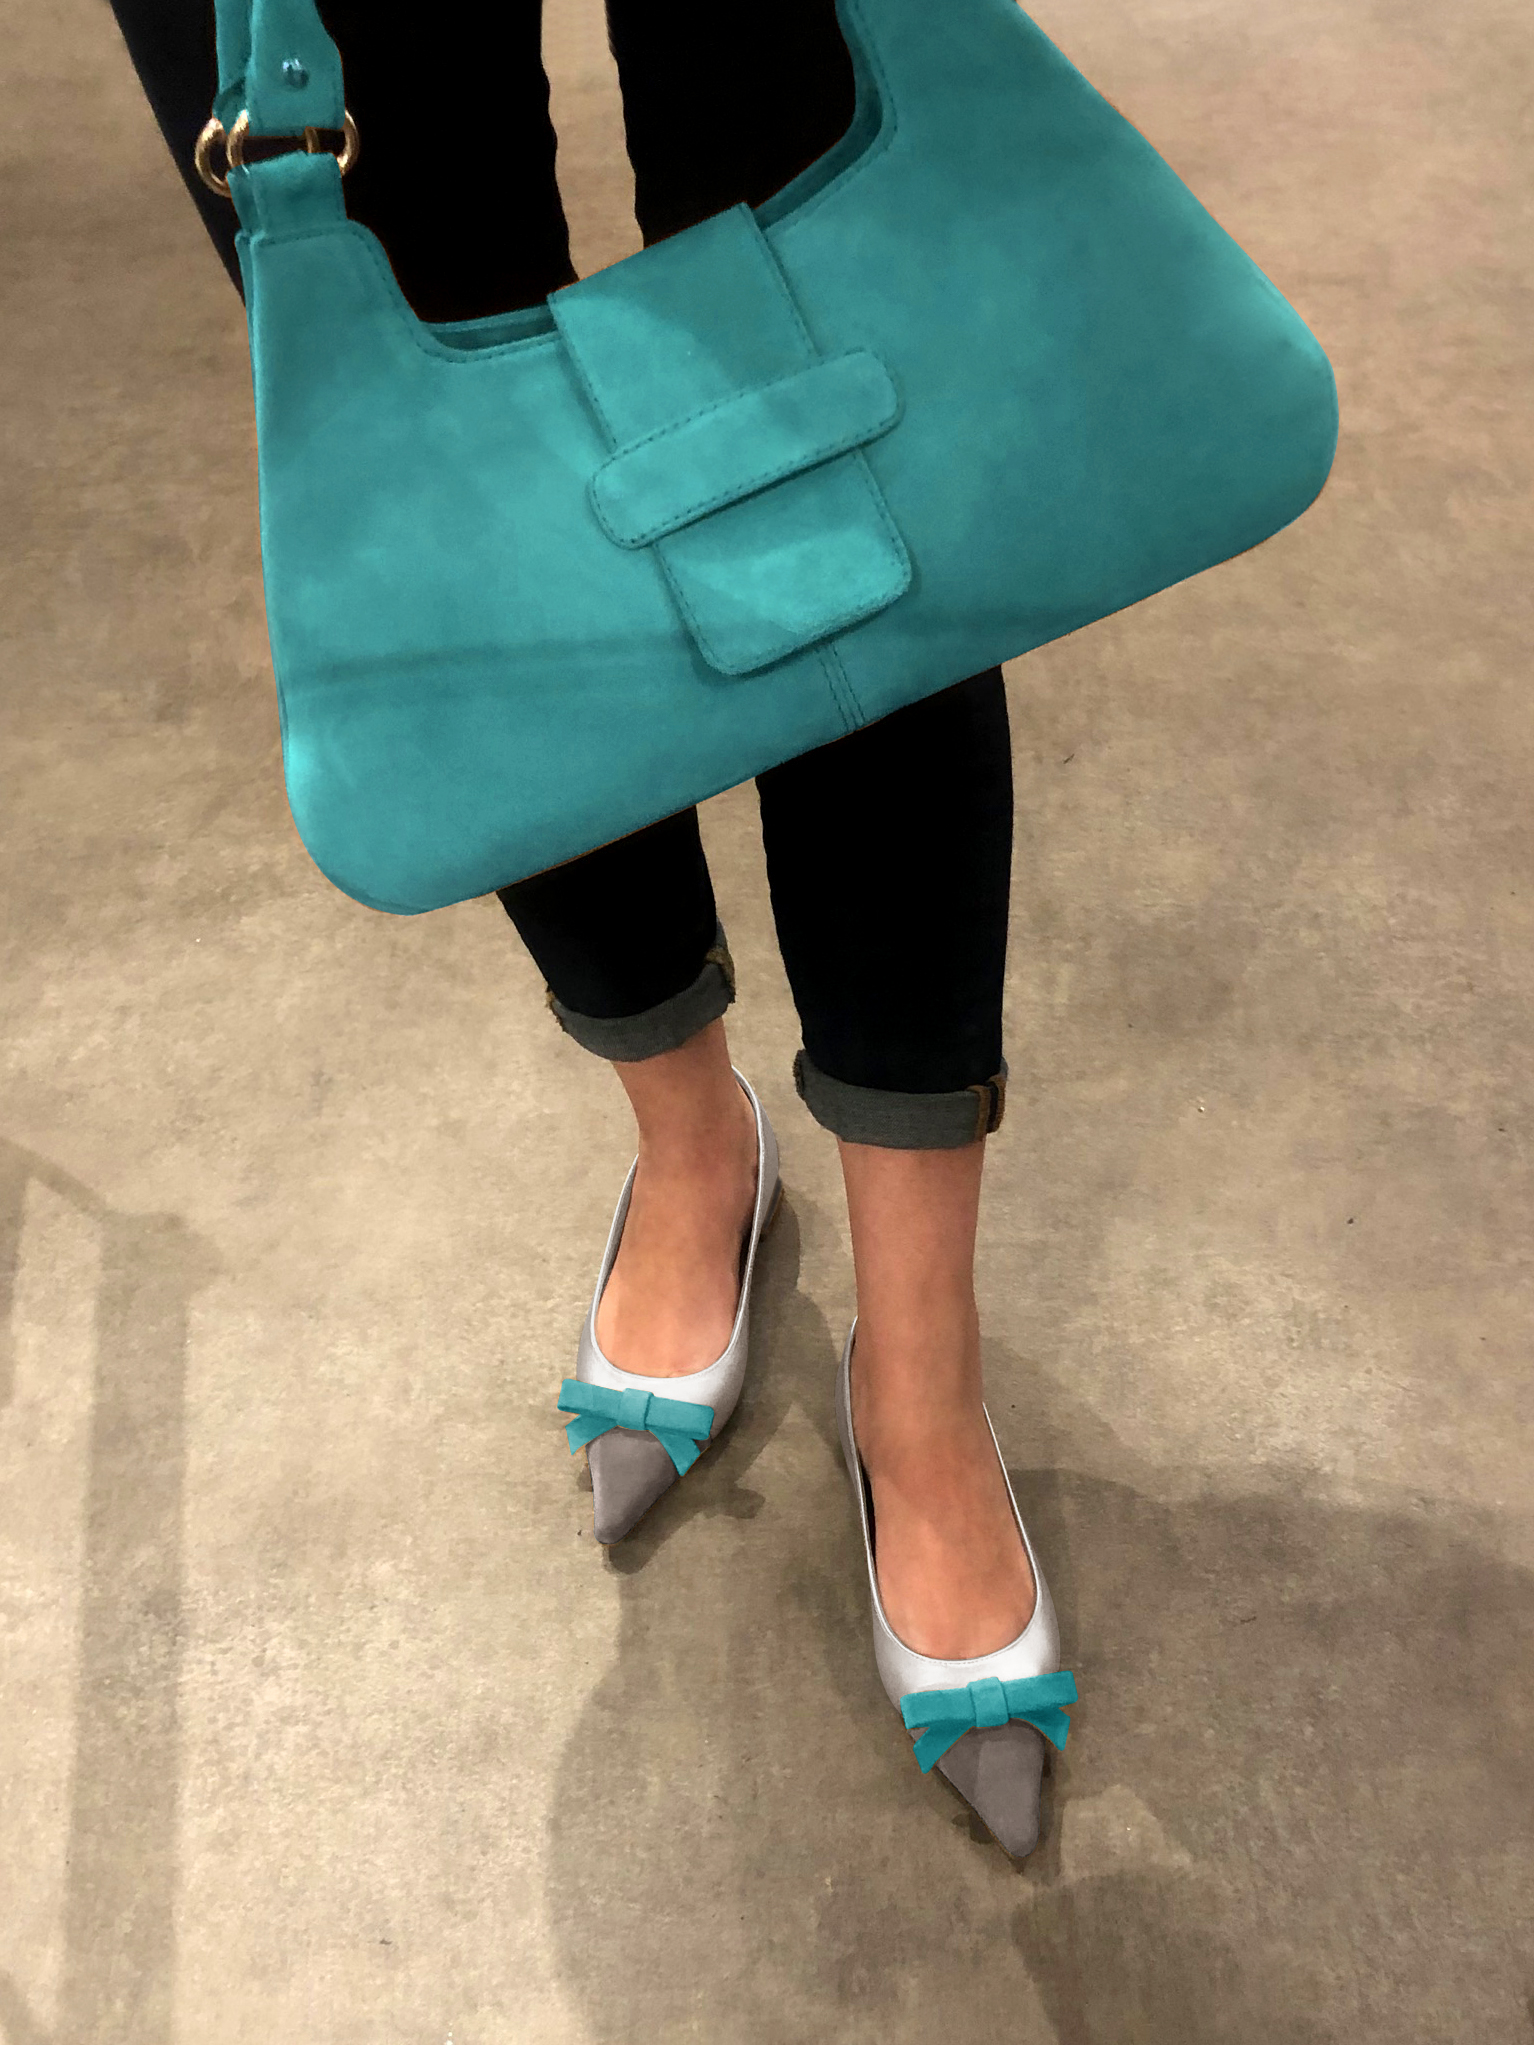 Pebble grey, light silver and aquamarine blue women's ballet pumps, with low heels. Pointed toe. Flat flare heels. Worn view - Florence KOOIJMAN